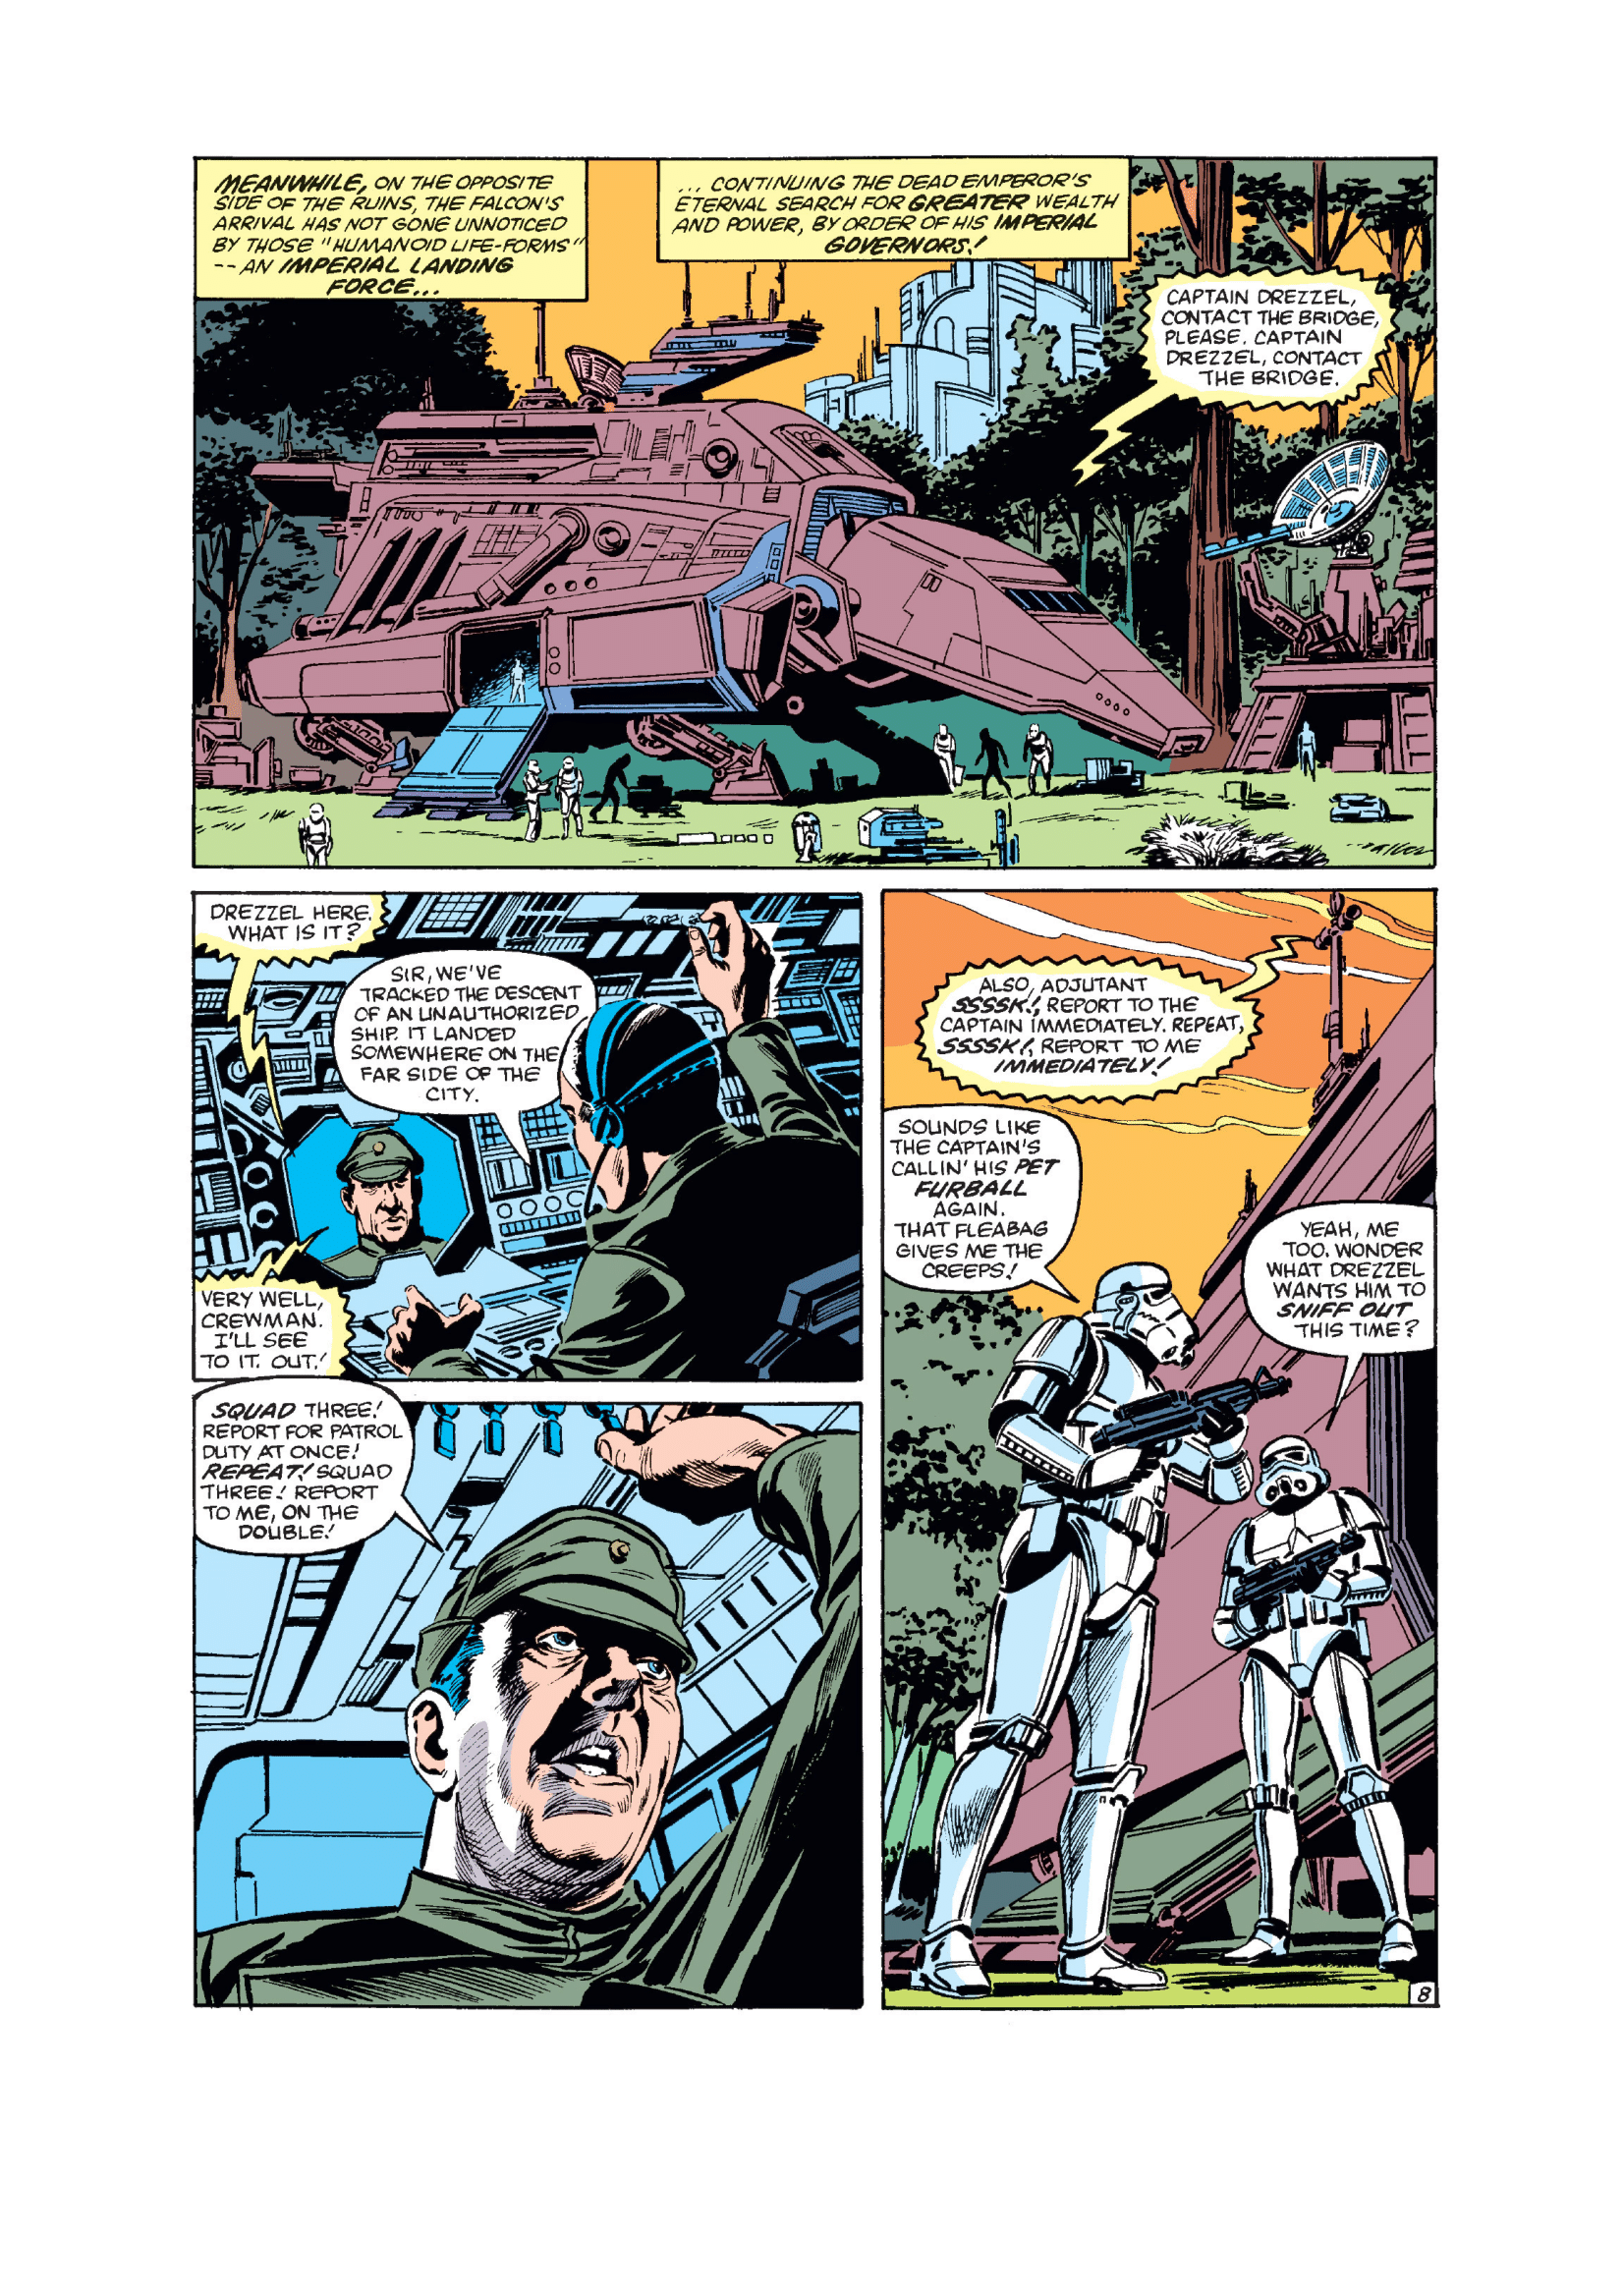 Star Wars (1977) Issue #_84 - Read Star Wars (1977) Issue #_84 comic online in high quality-18.png